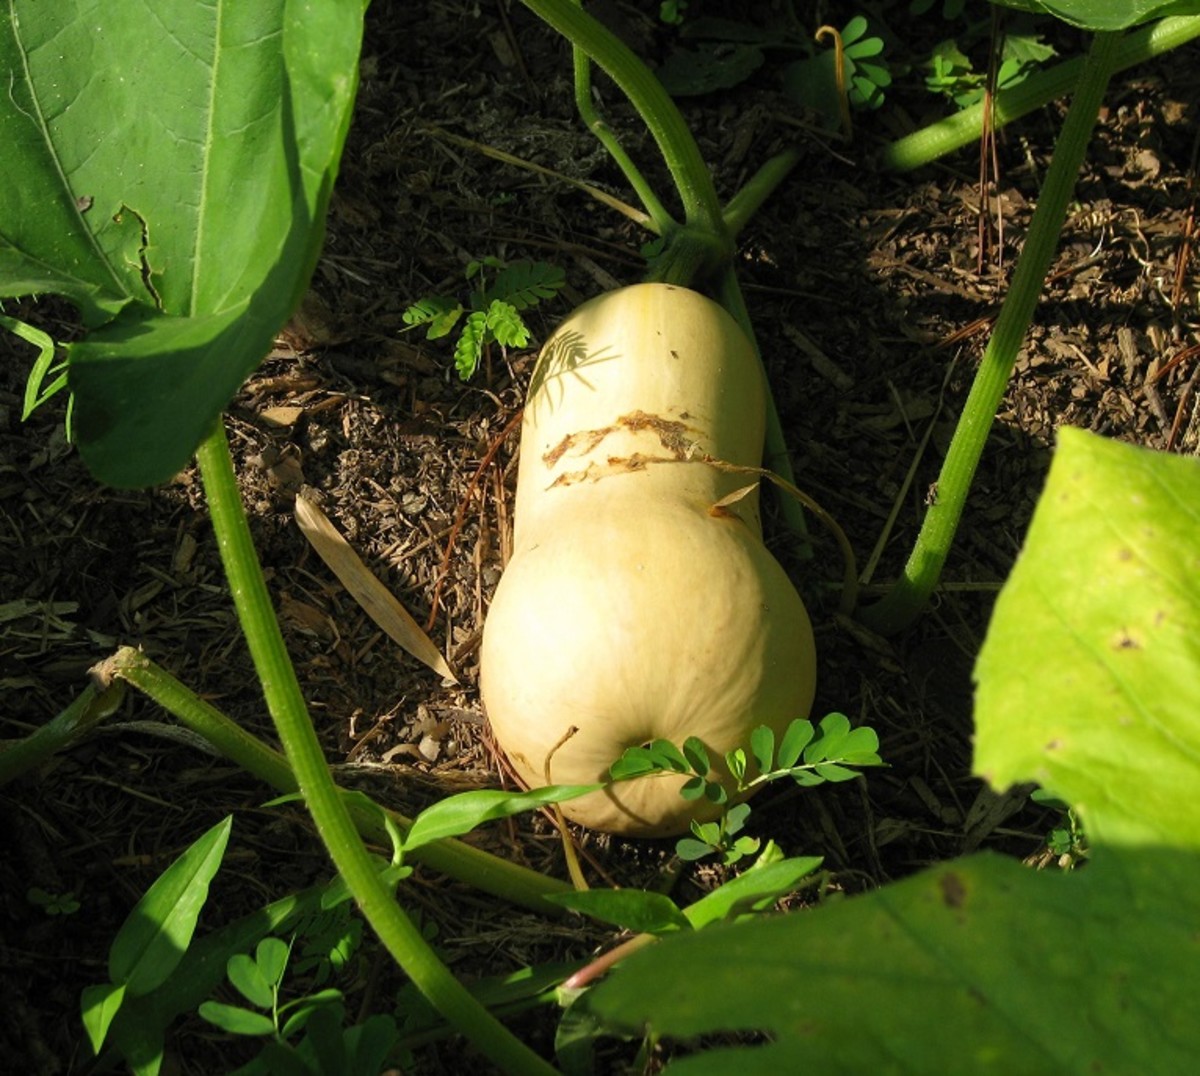 This butternut needs to ripen some more. The skin is a little too light in color.